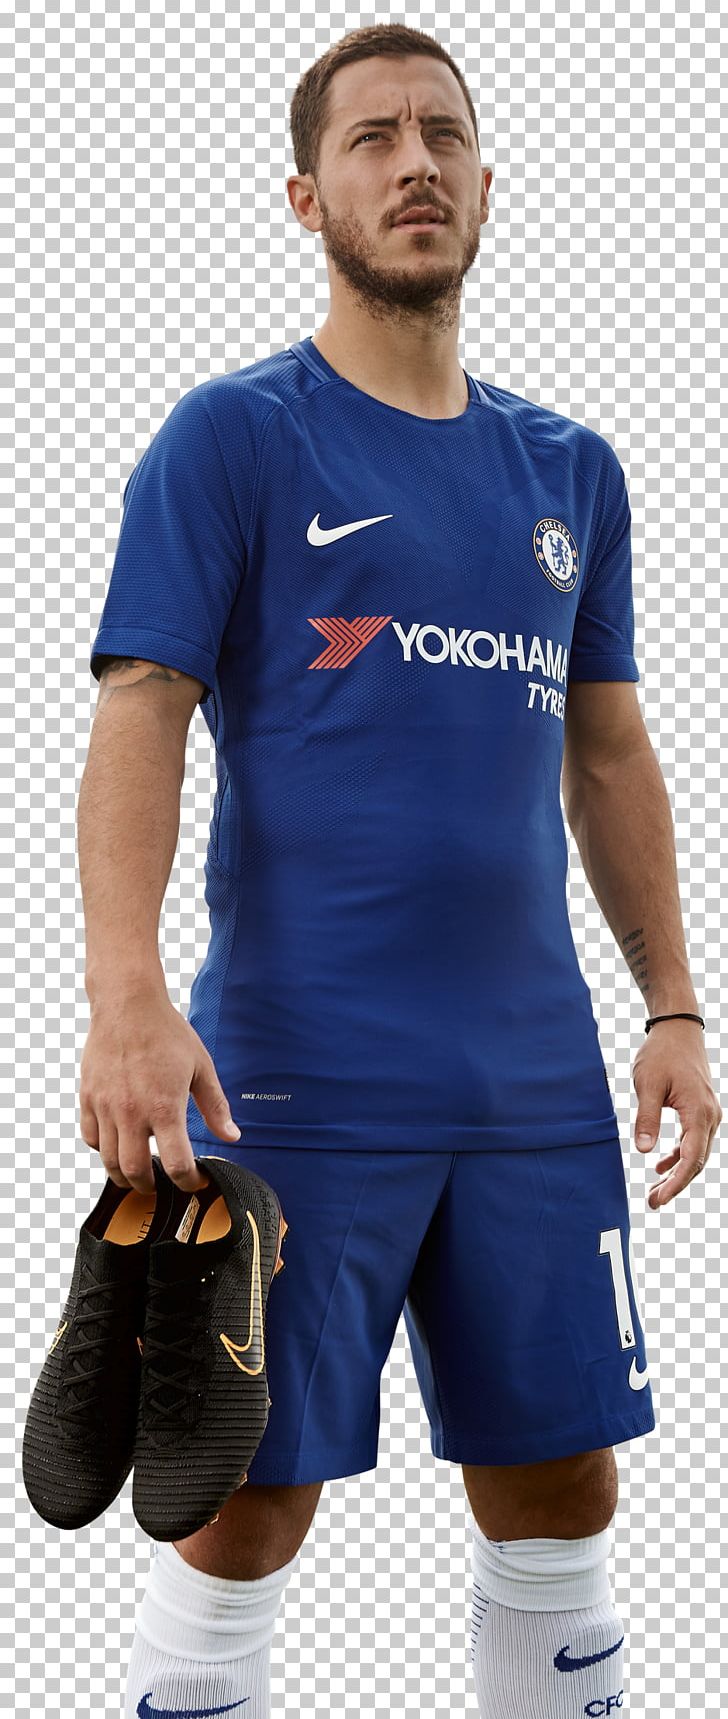 Eden Hazard Chelsea F.C. Premier League Football Boot Nike PNG, Clipart, Arm, Blue, Chelsea Fc, Clothing, Cristiano Ronaldo Free PNG Download